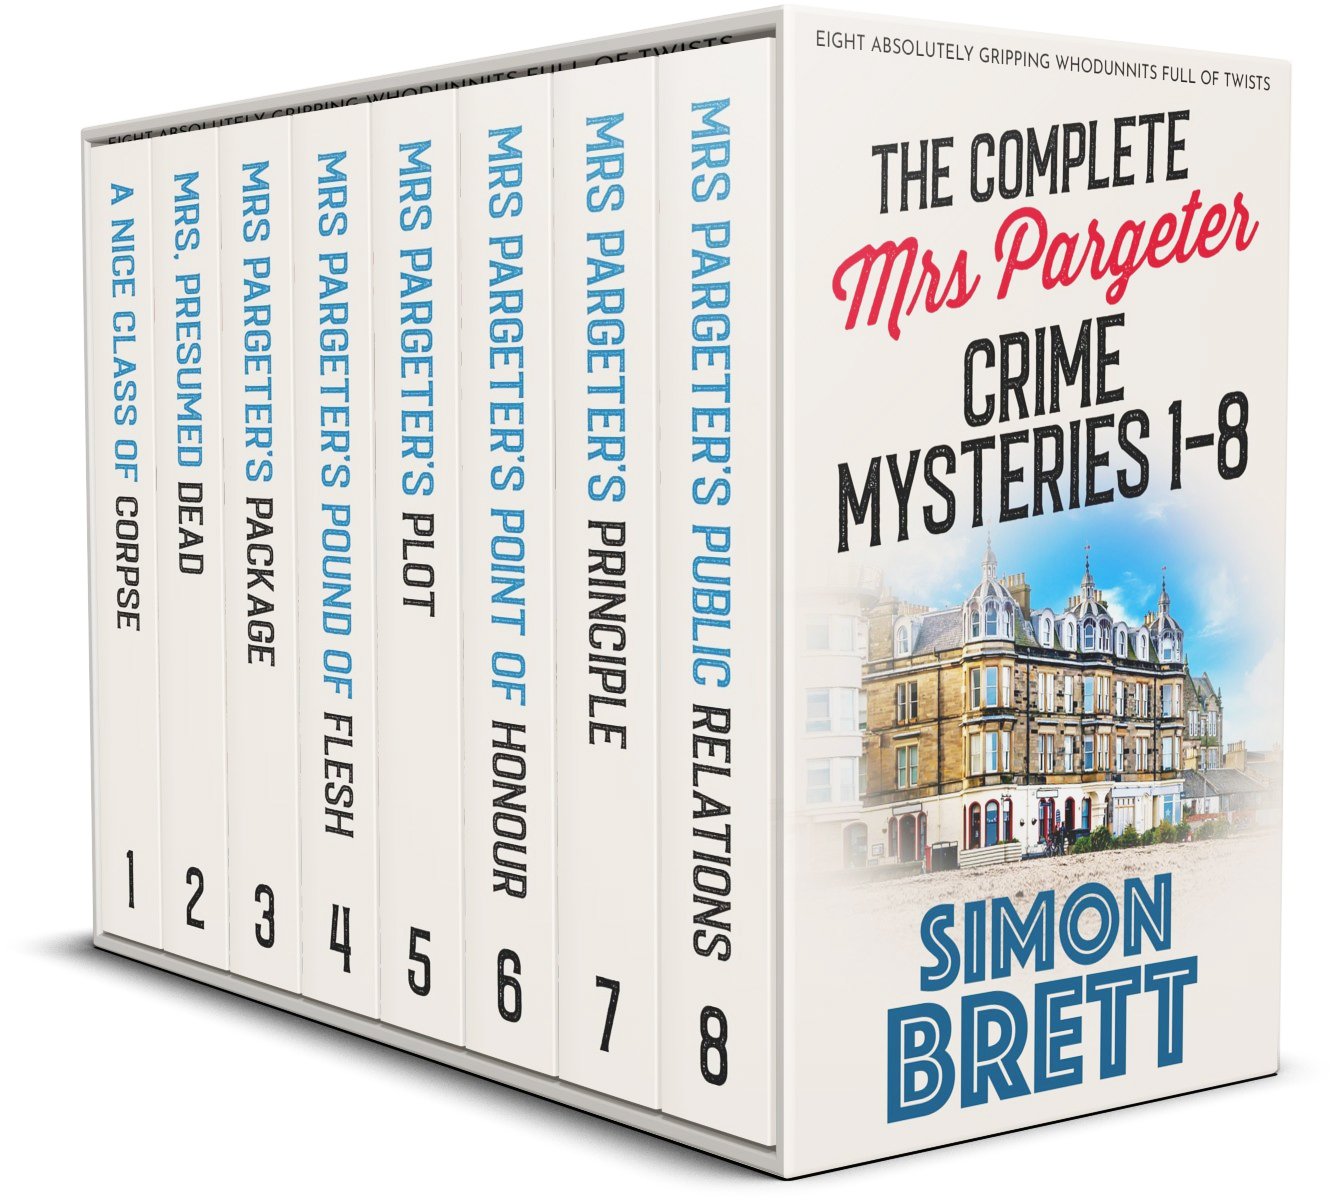 COMPLETE MRS PARGETER CRIME MYSTERIES 1-8 cover publish.jpg